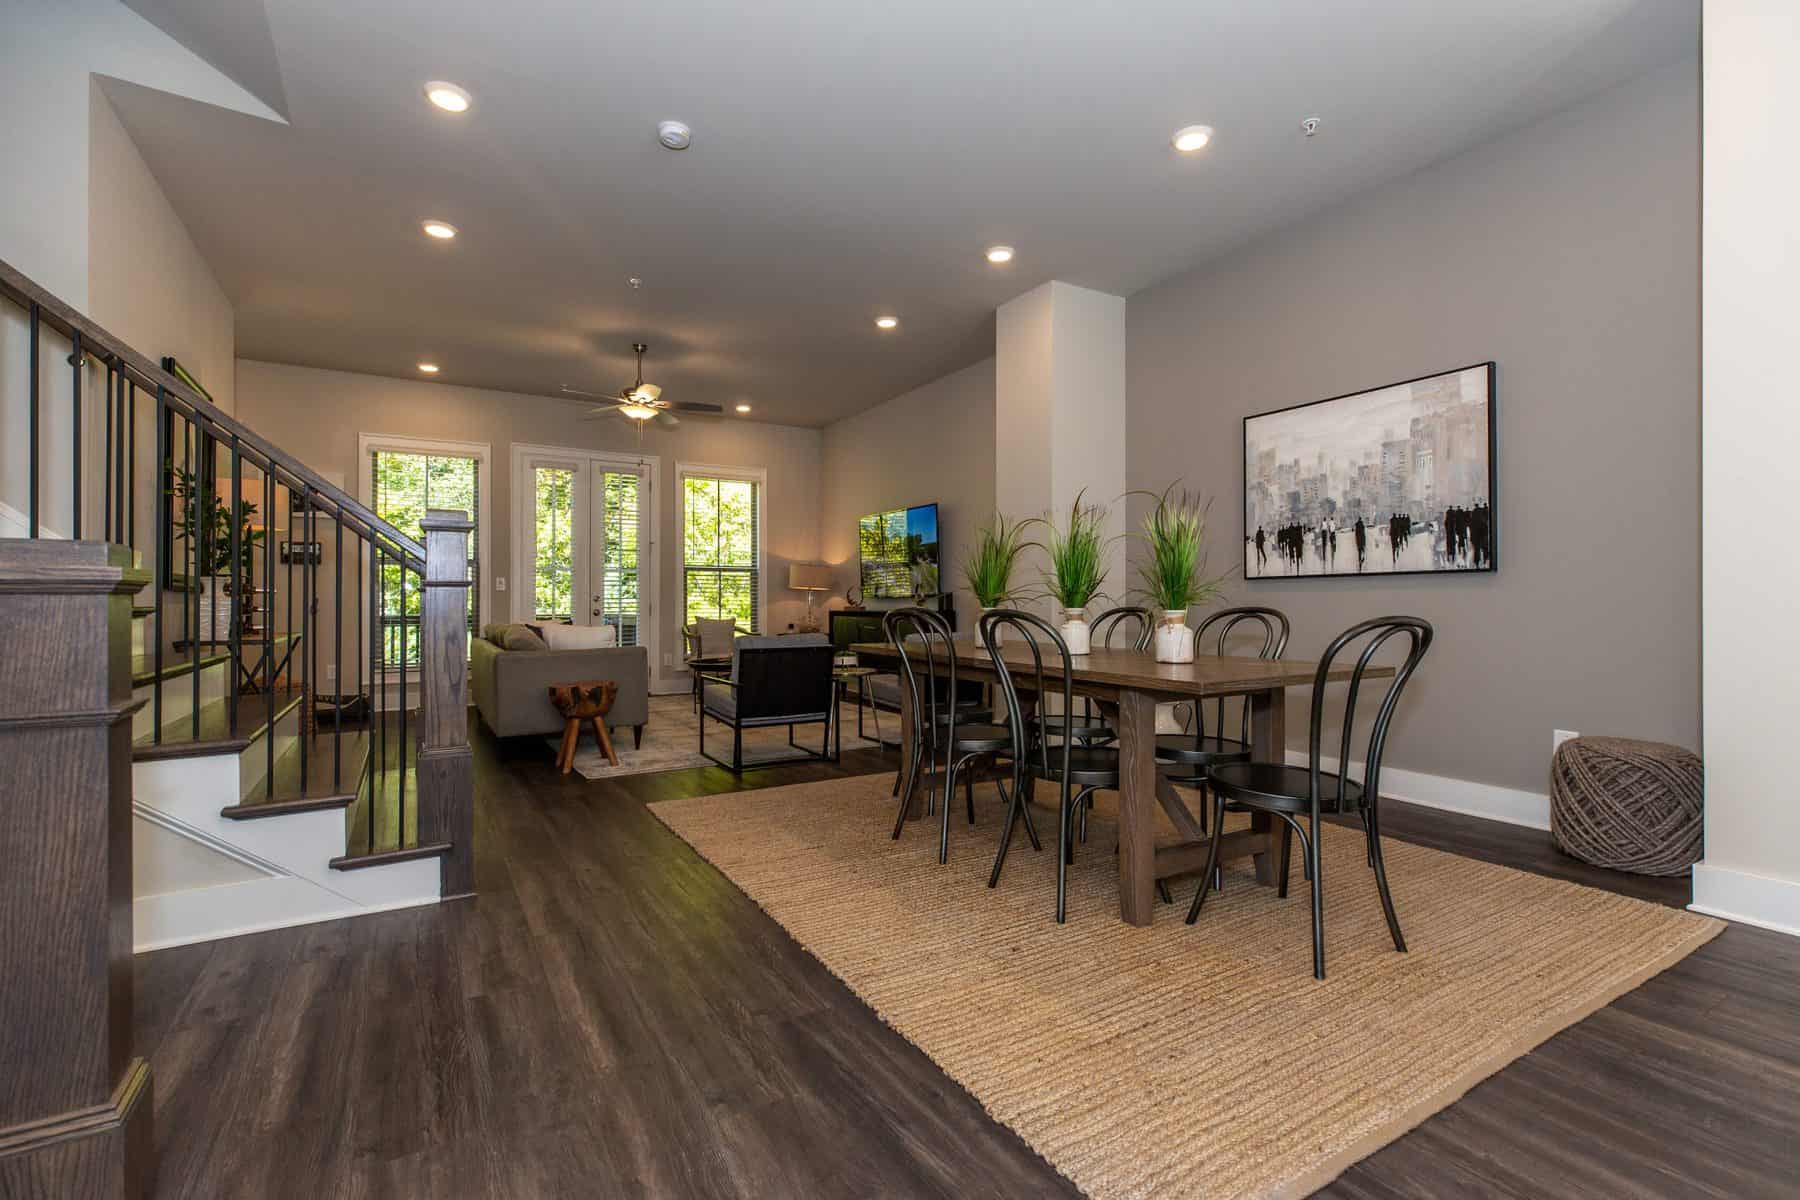 Limited-Time $10K Incentive on Woodstock Townhomes at Mason Main*